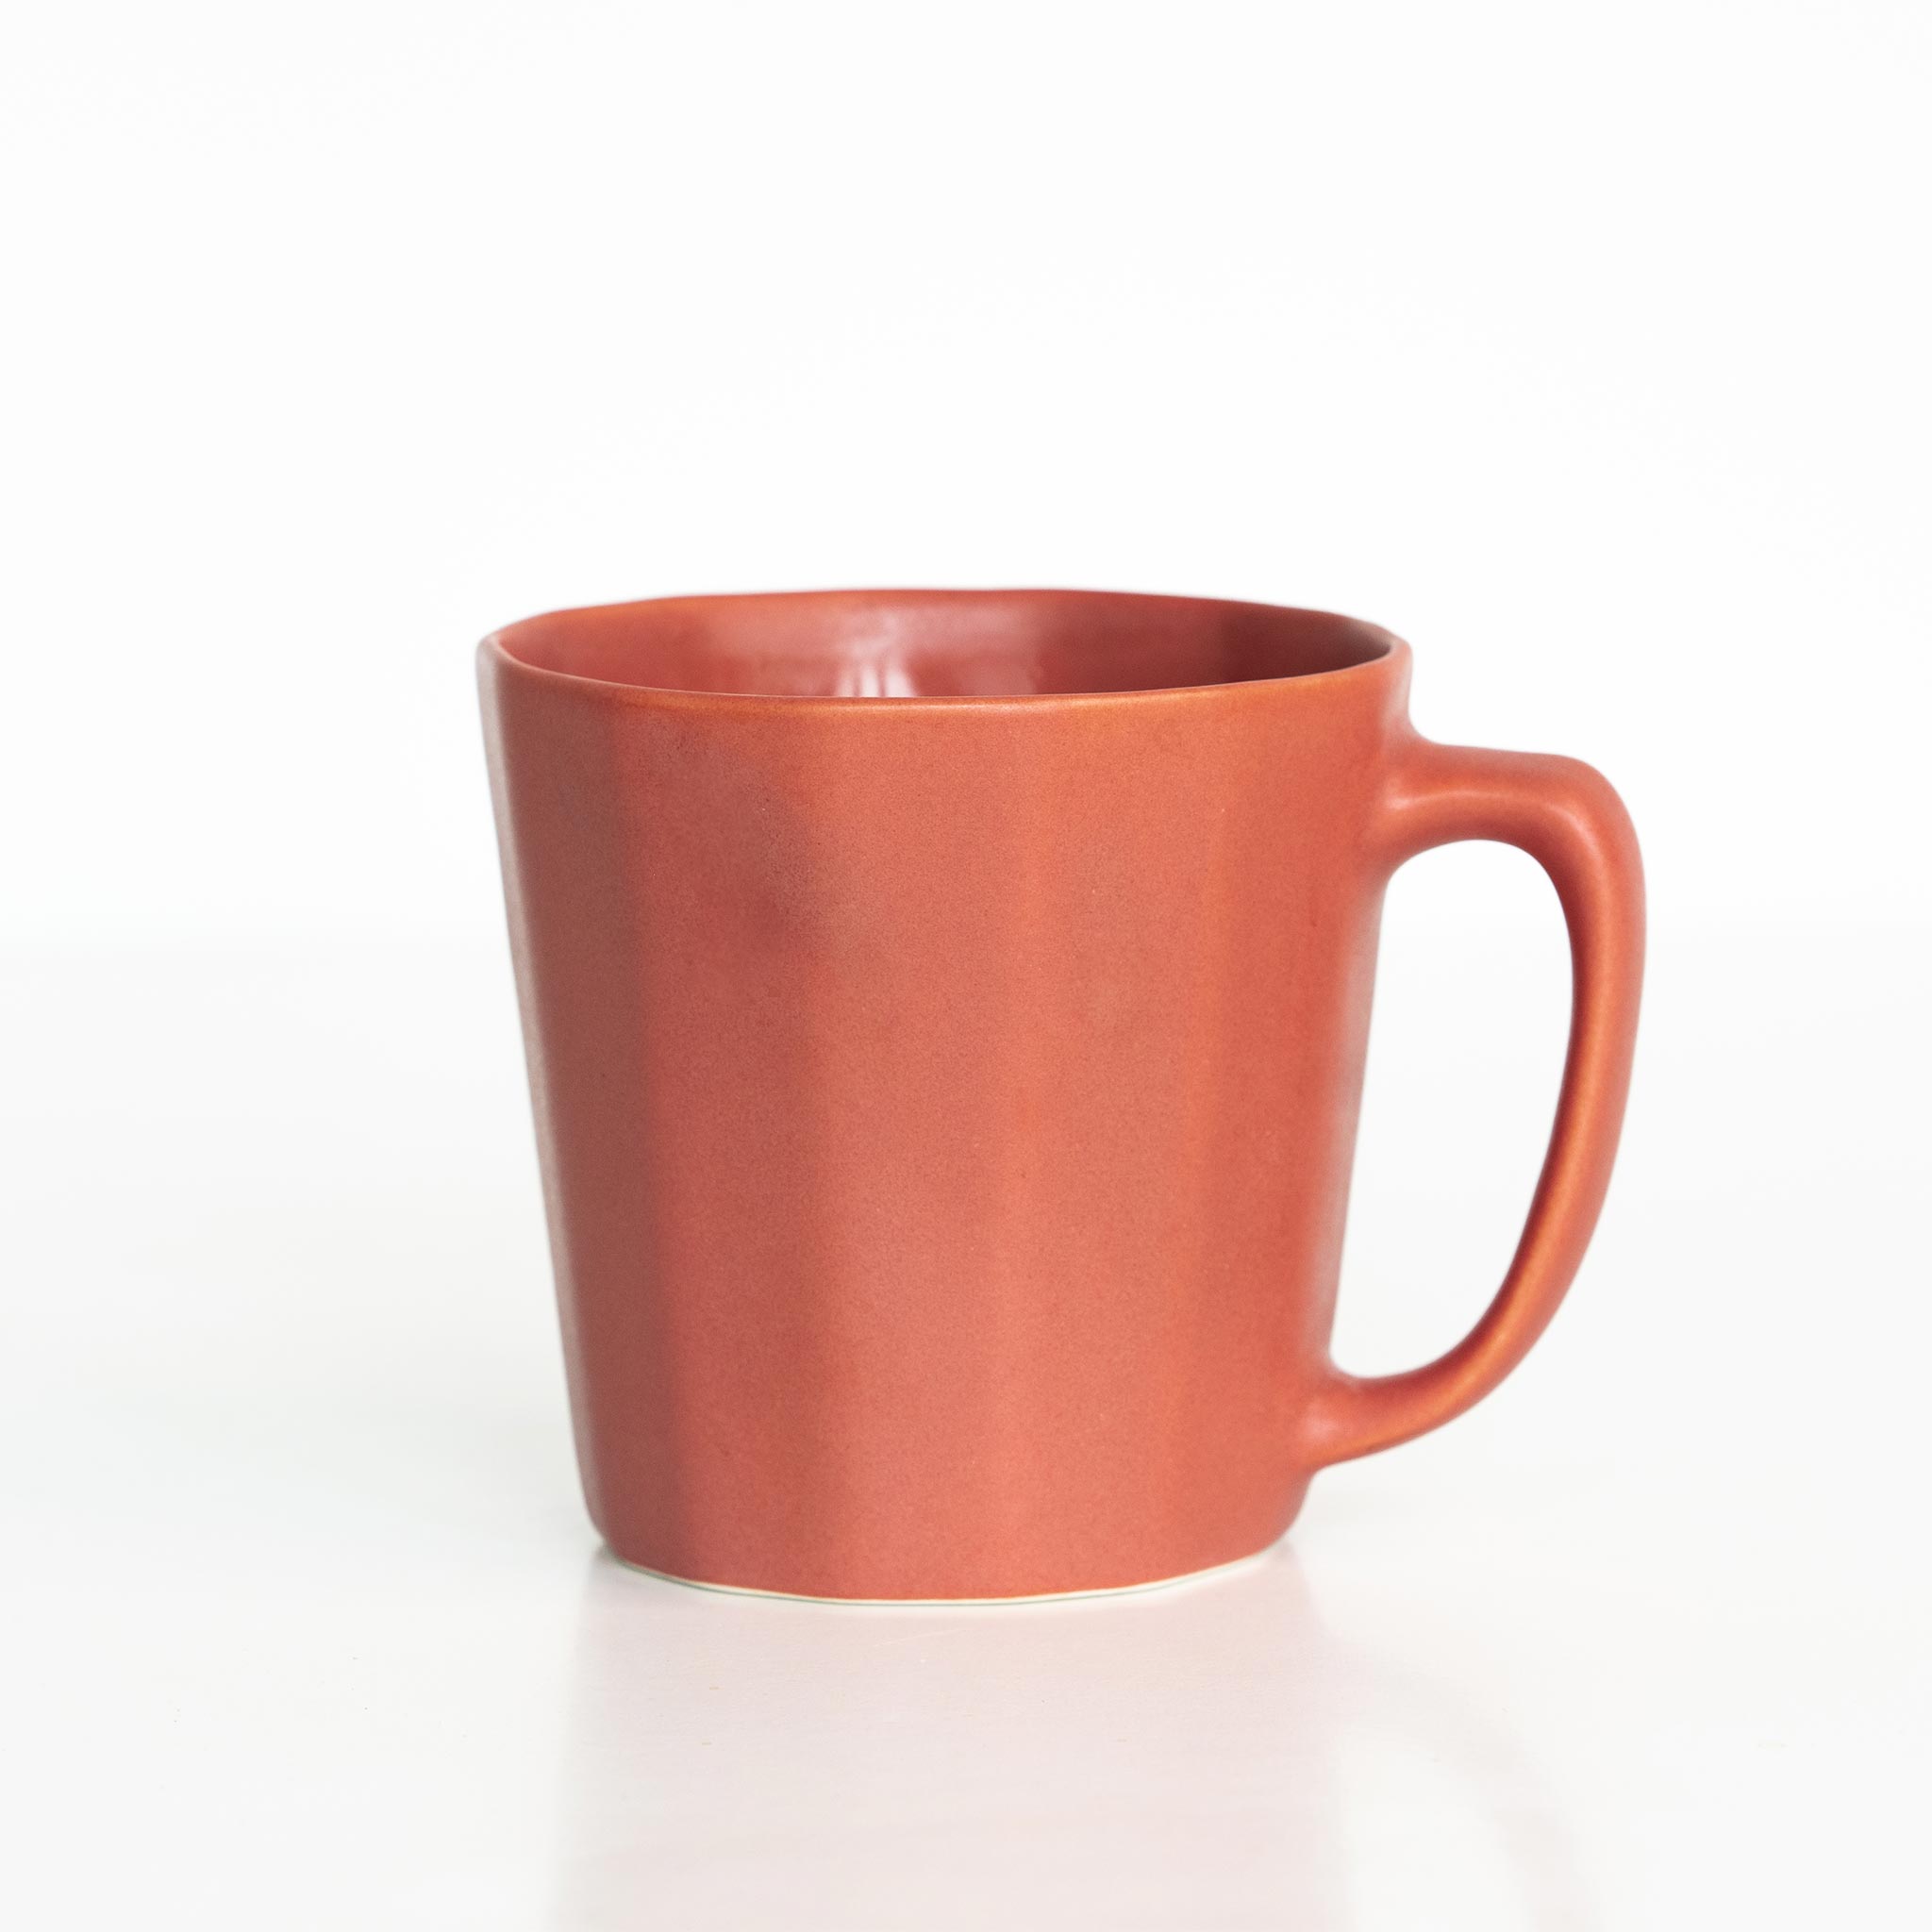 Monday Mug - Handmade Porcelain Coffee Cup Terracotta Red The Bright Angle